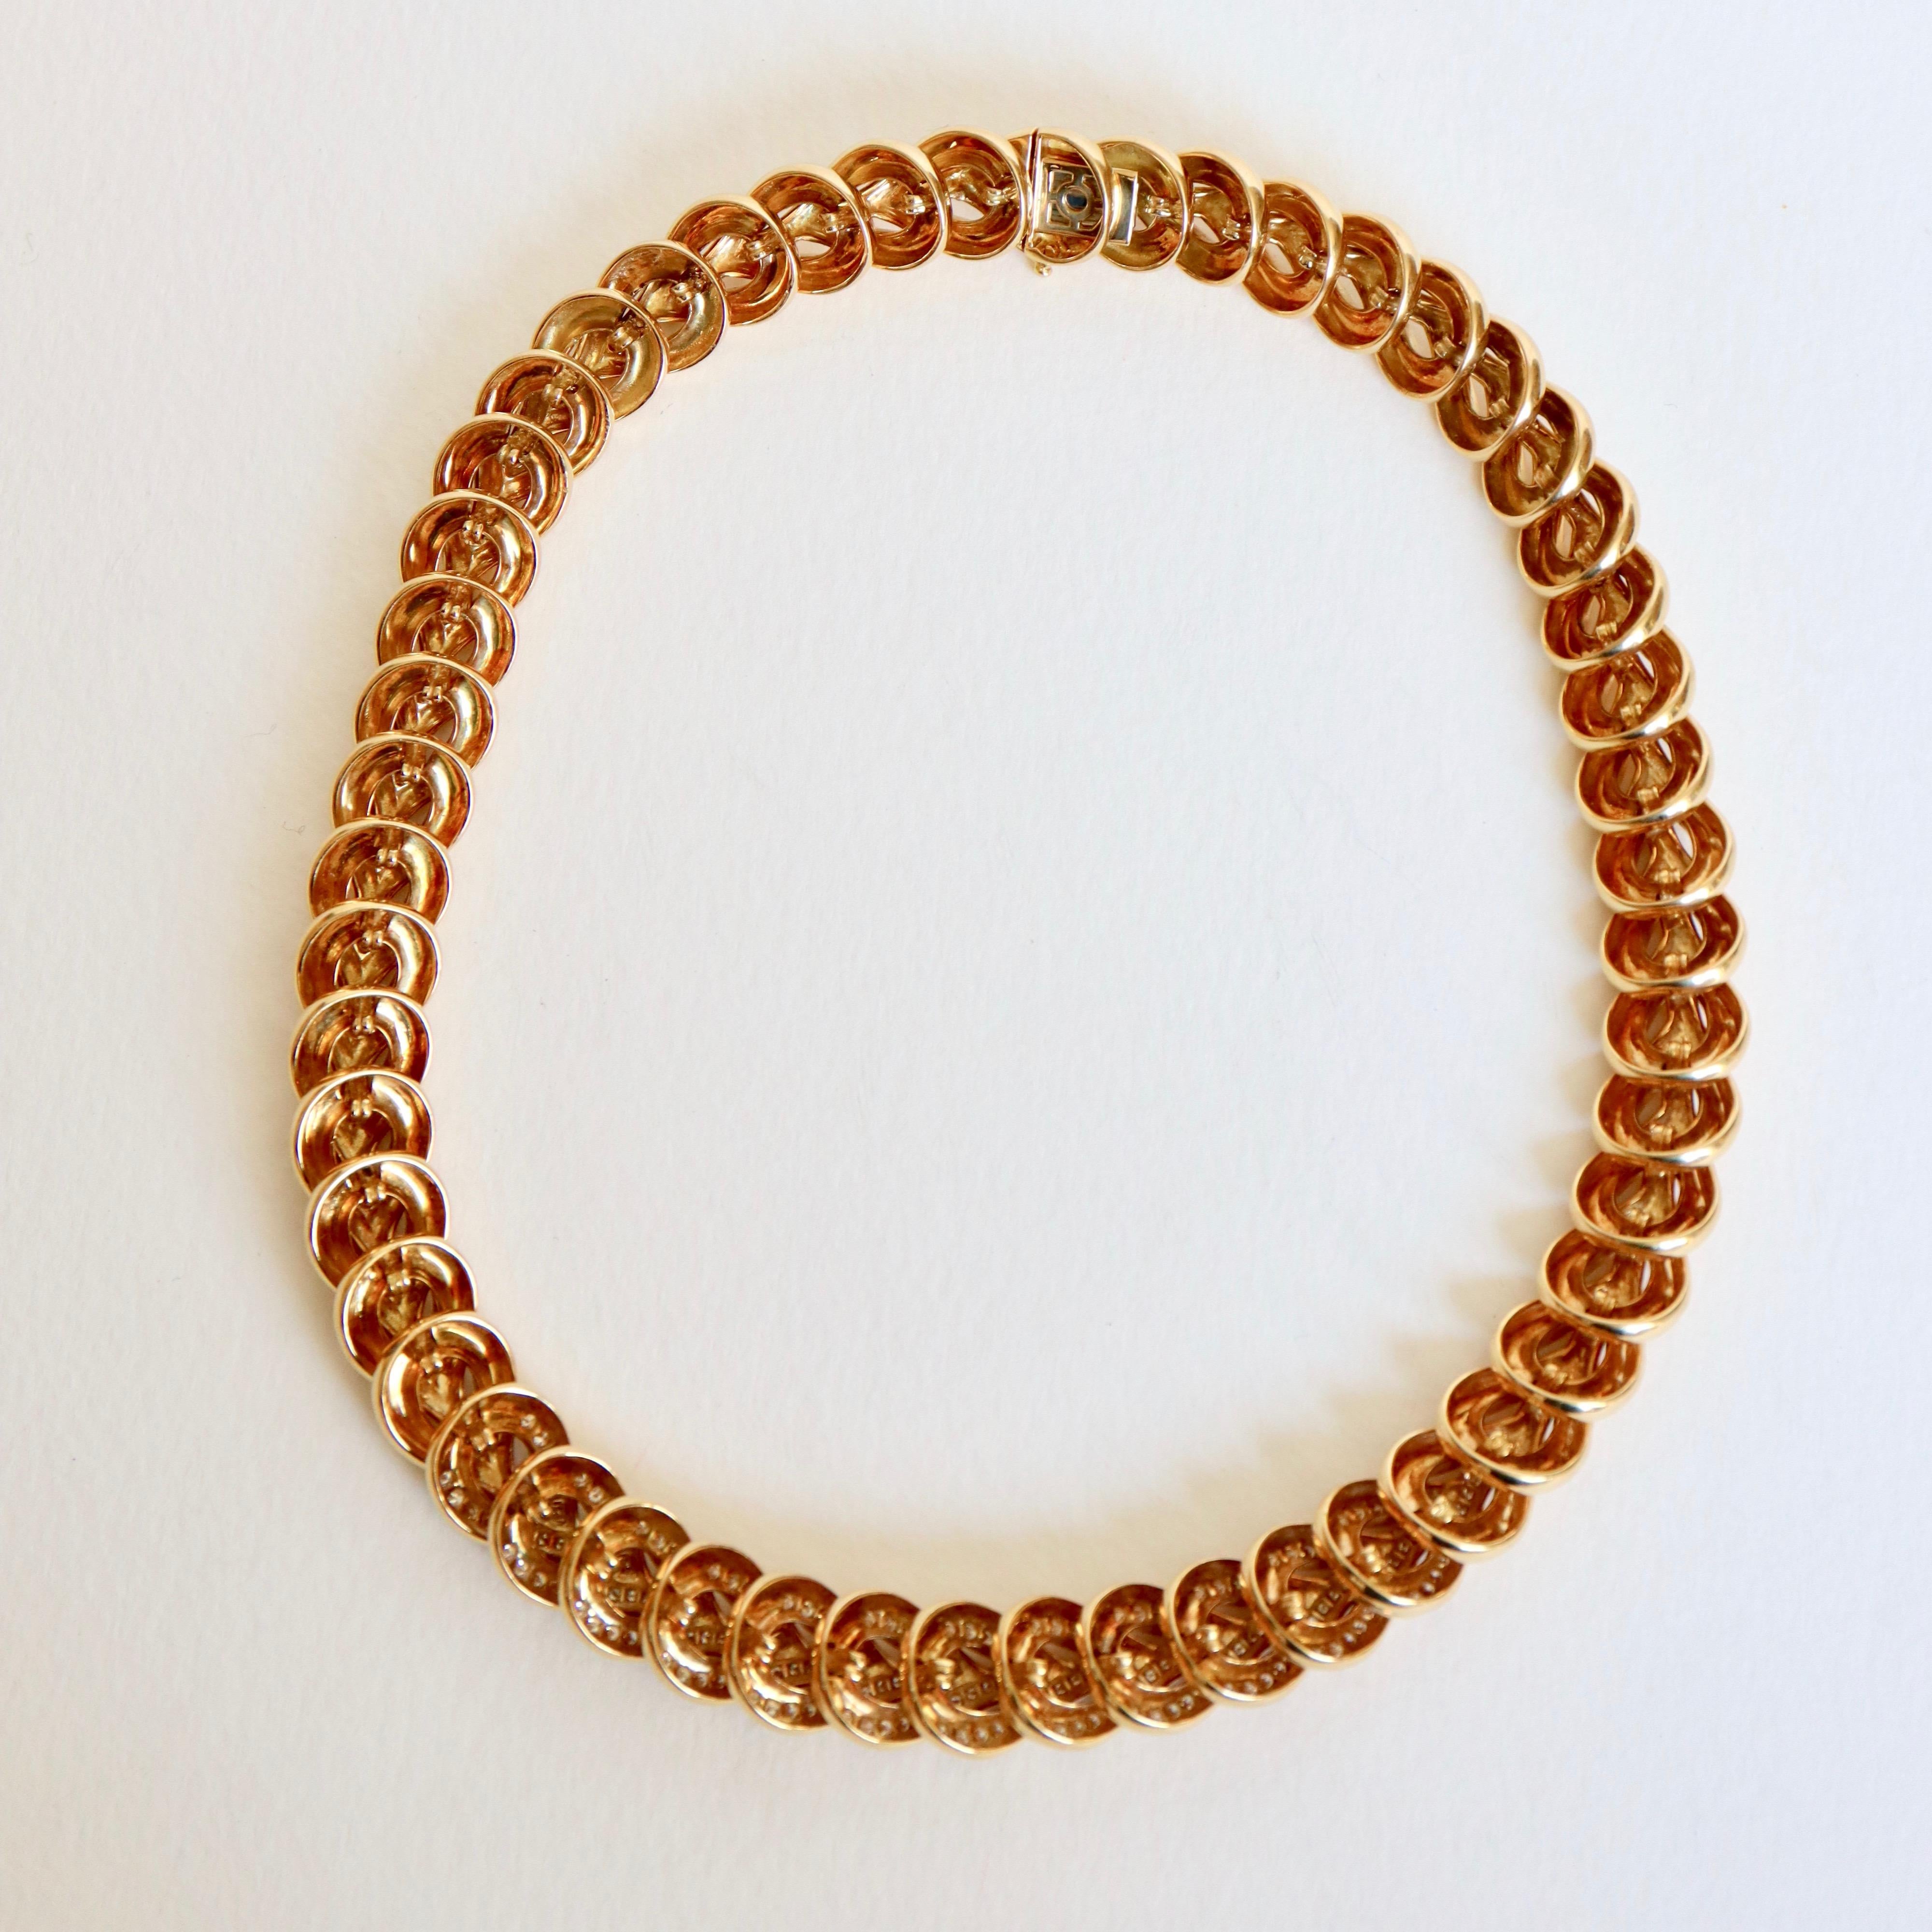 Boucheron Necklace in 18 Carat Yellow Gold and Diamonds 1